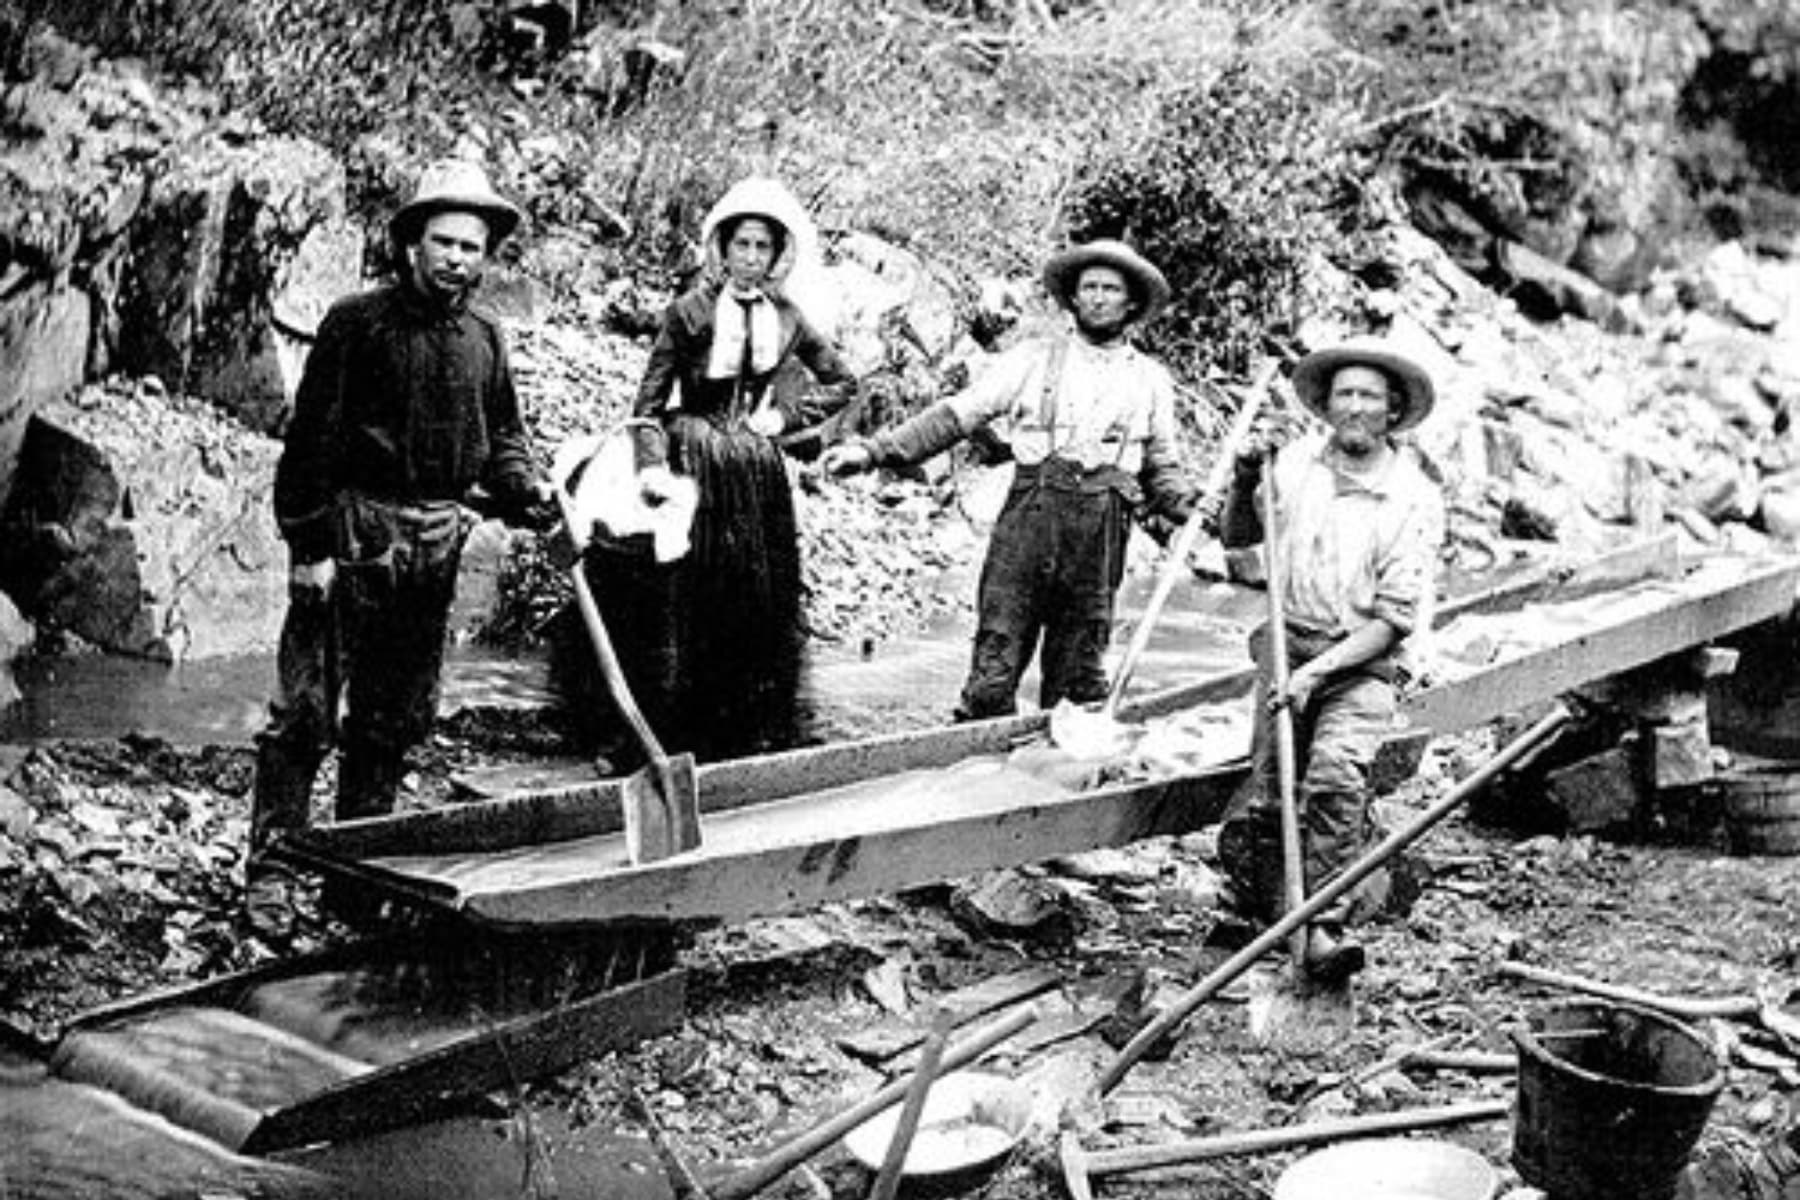 Three men and a woman during the Gold Rush holding mining tools.